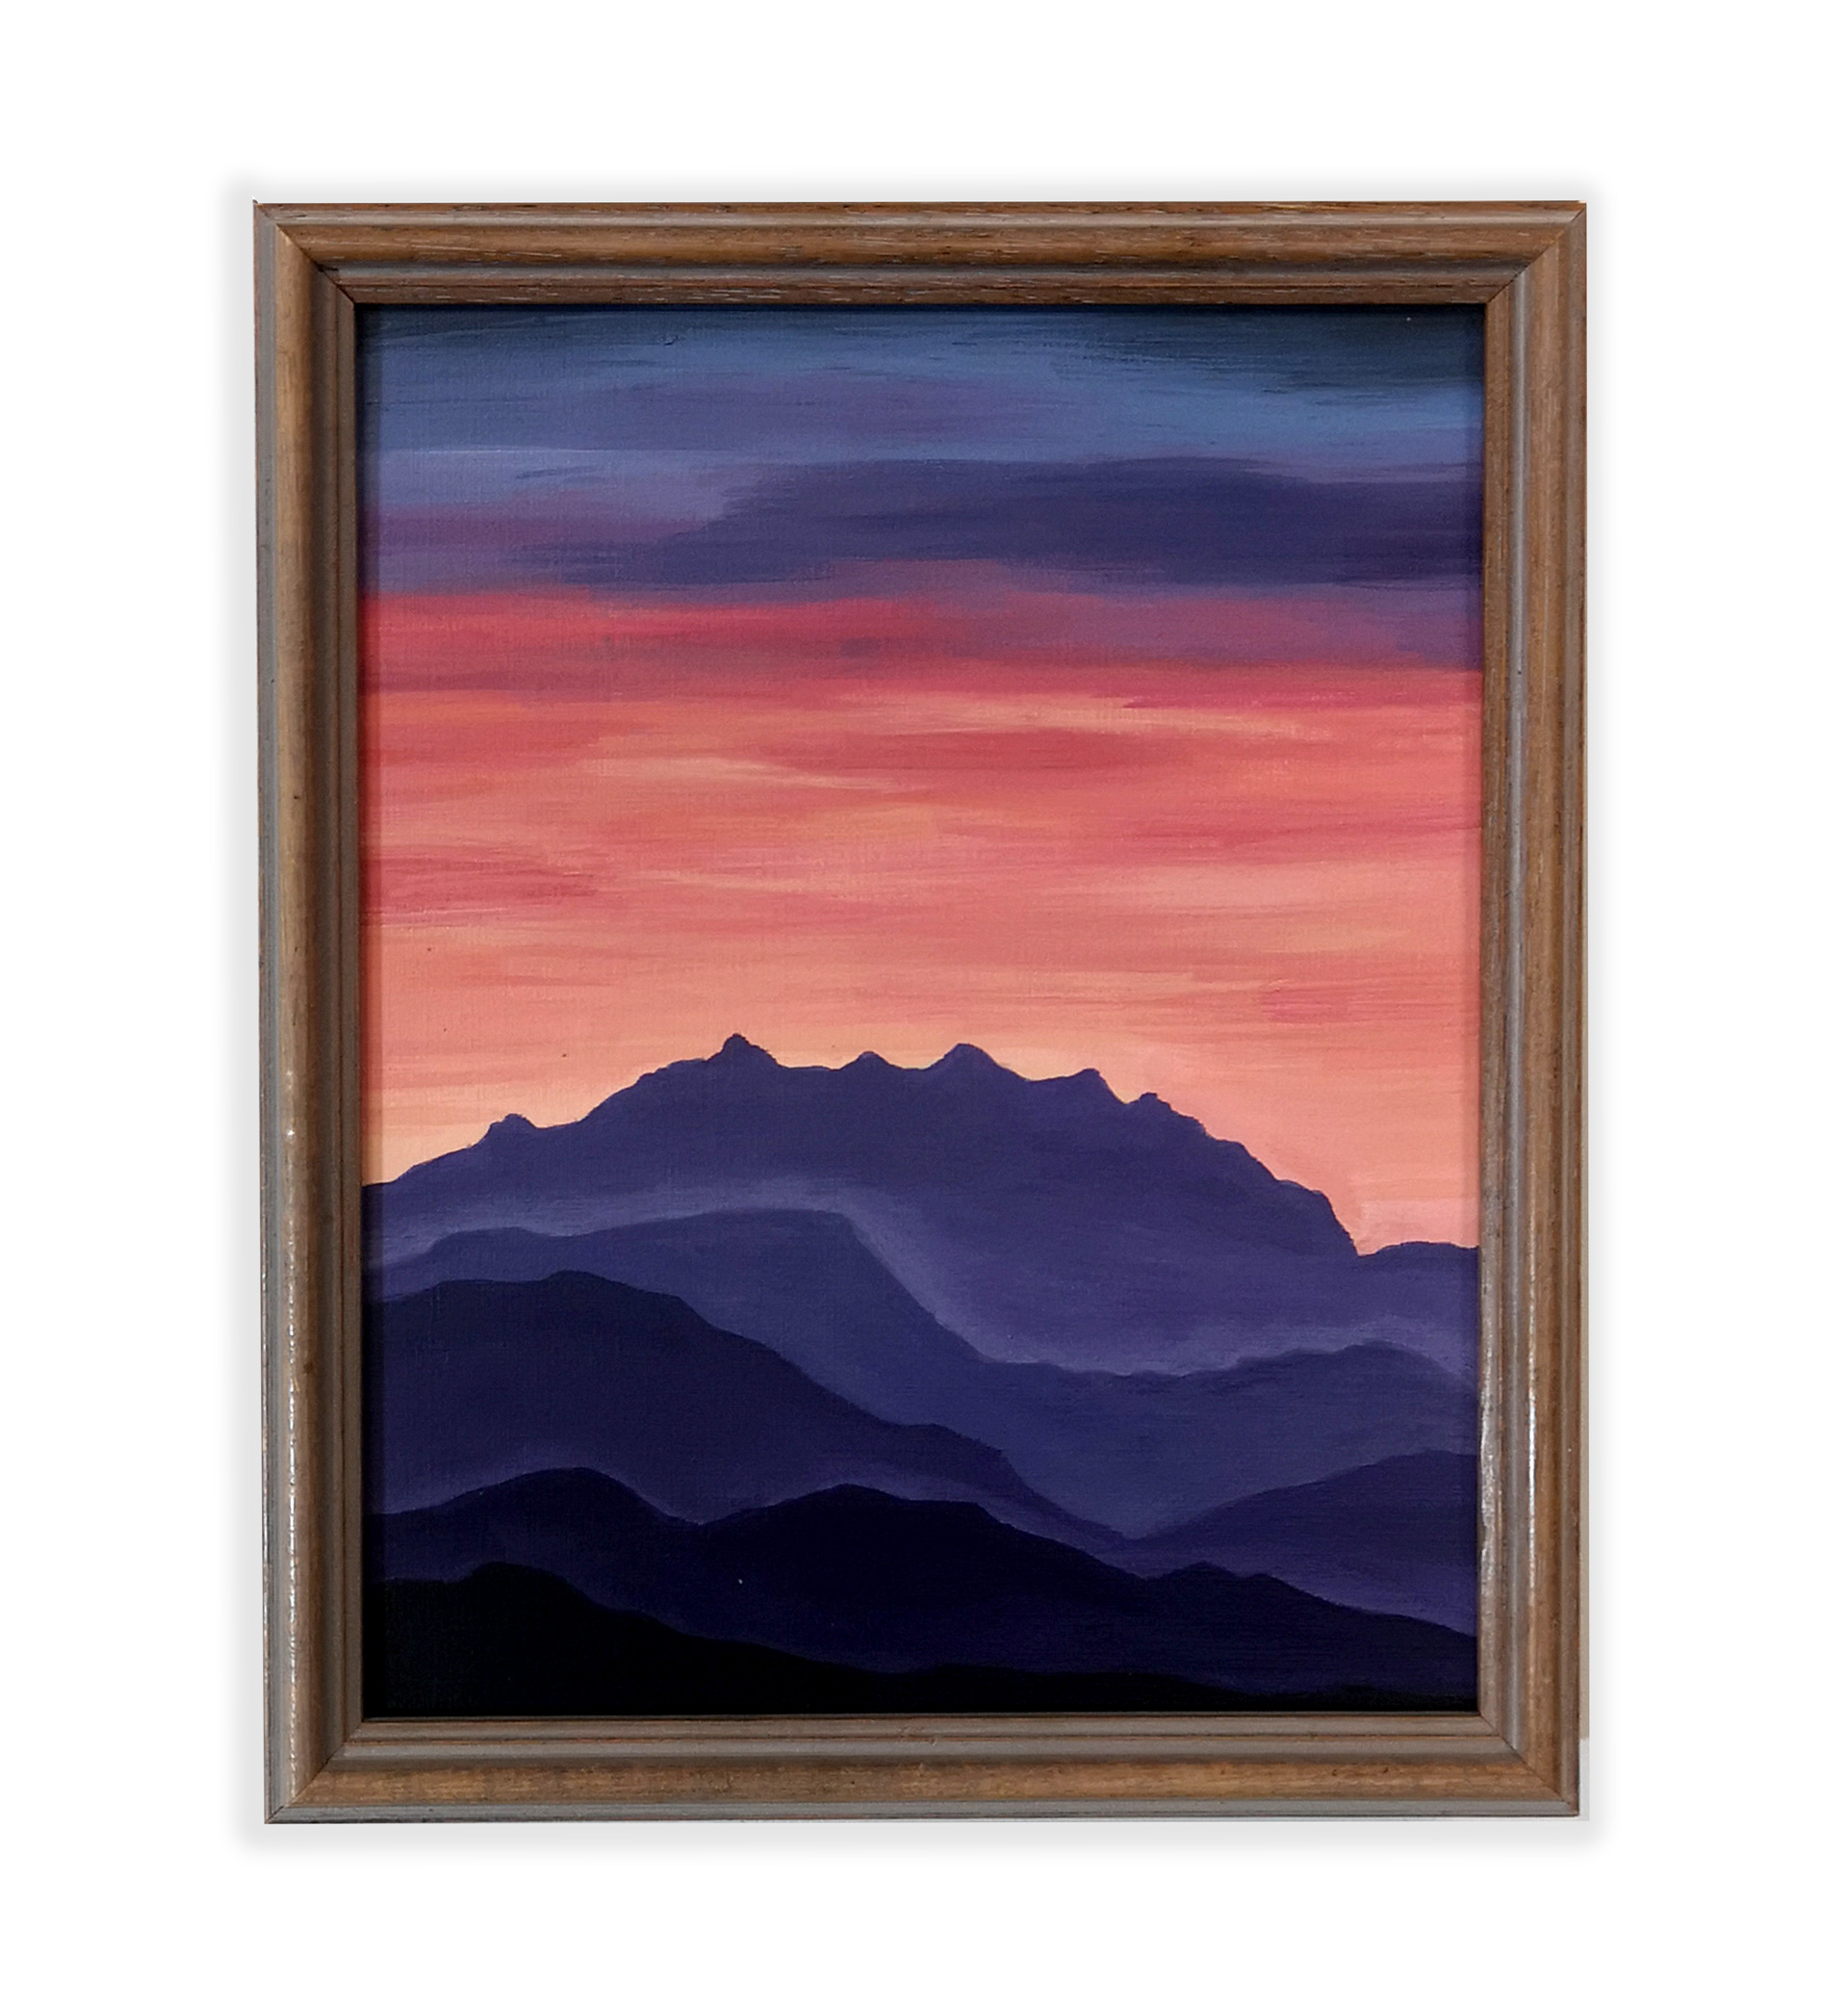 A purple and blue painting of mountains at dusk